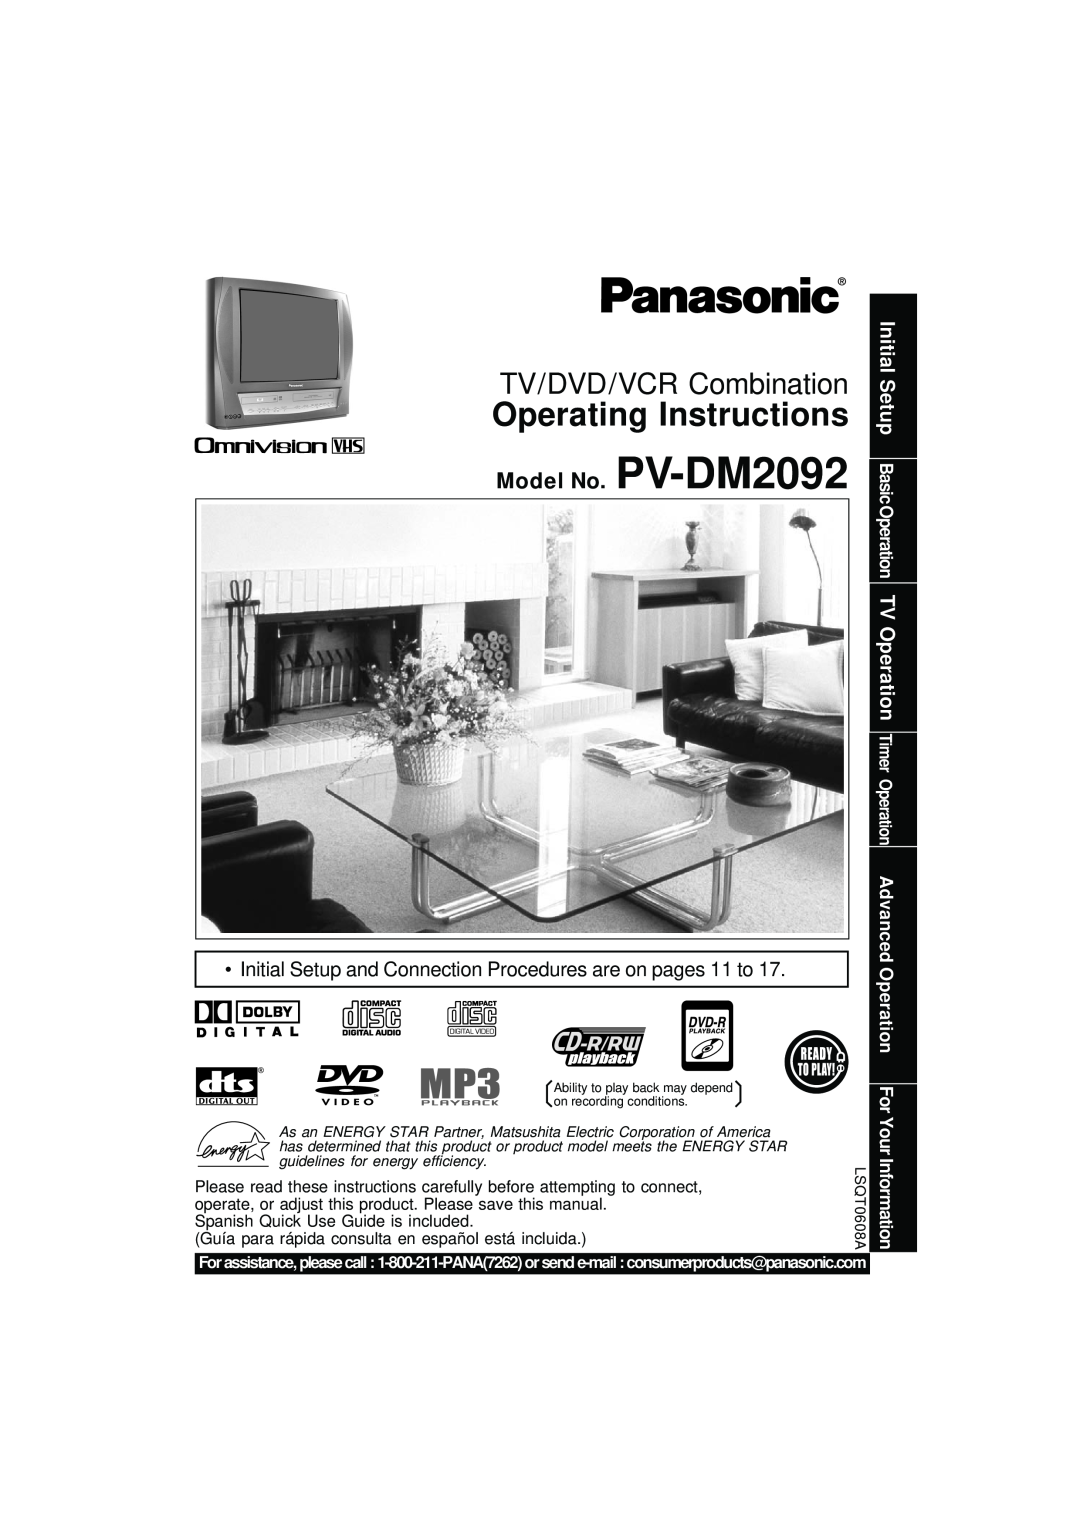 Panasonic PV DM2092 manual TV/DVD/VCR Combination, Model No. PV-DM2092, Advanced Operation, For Your Information 